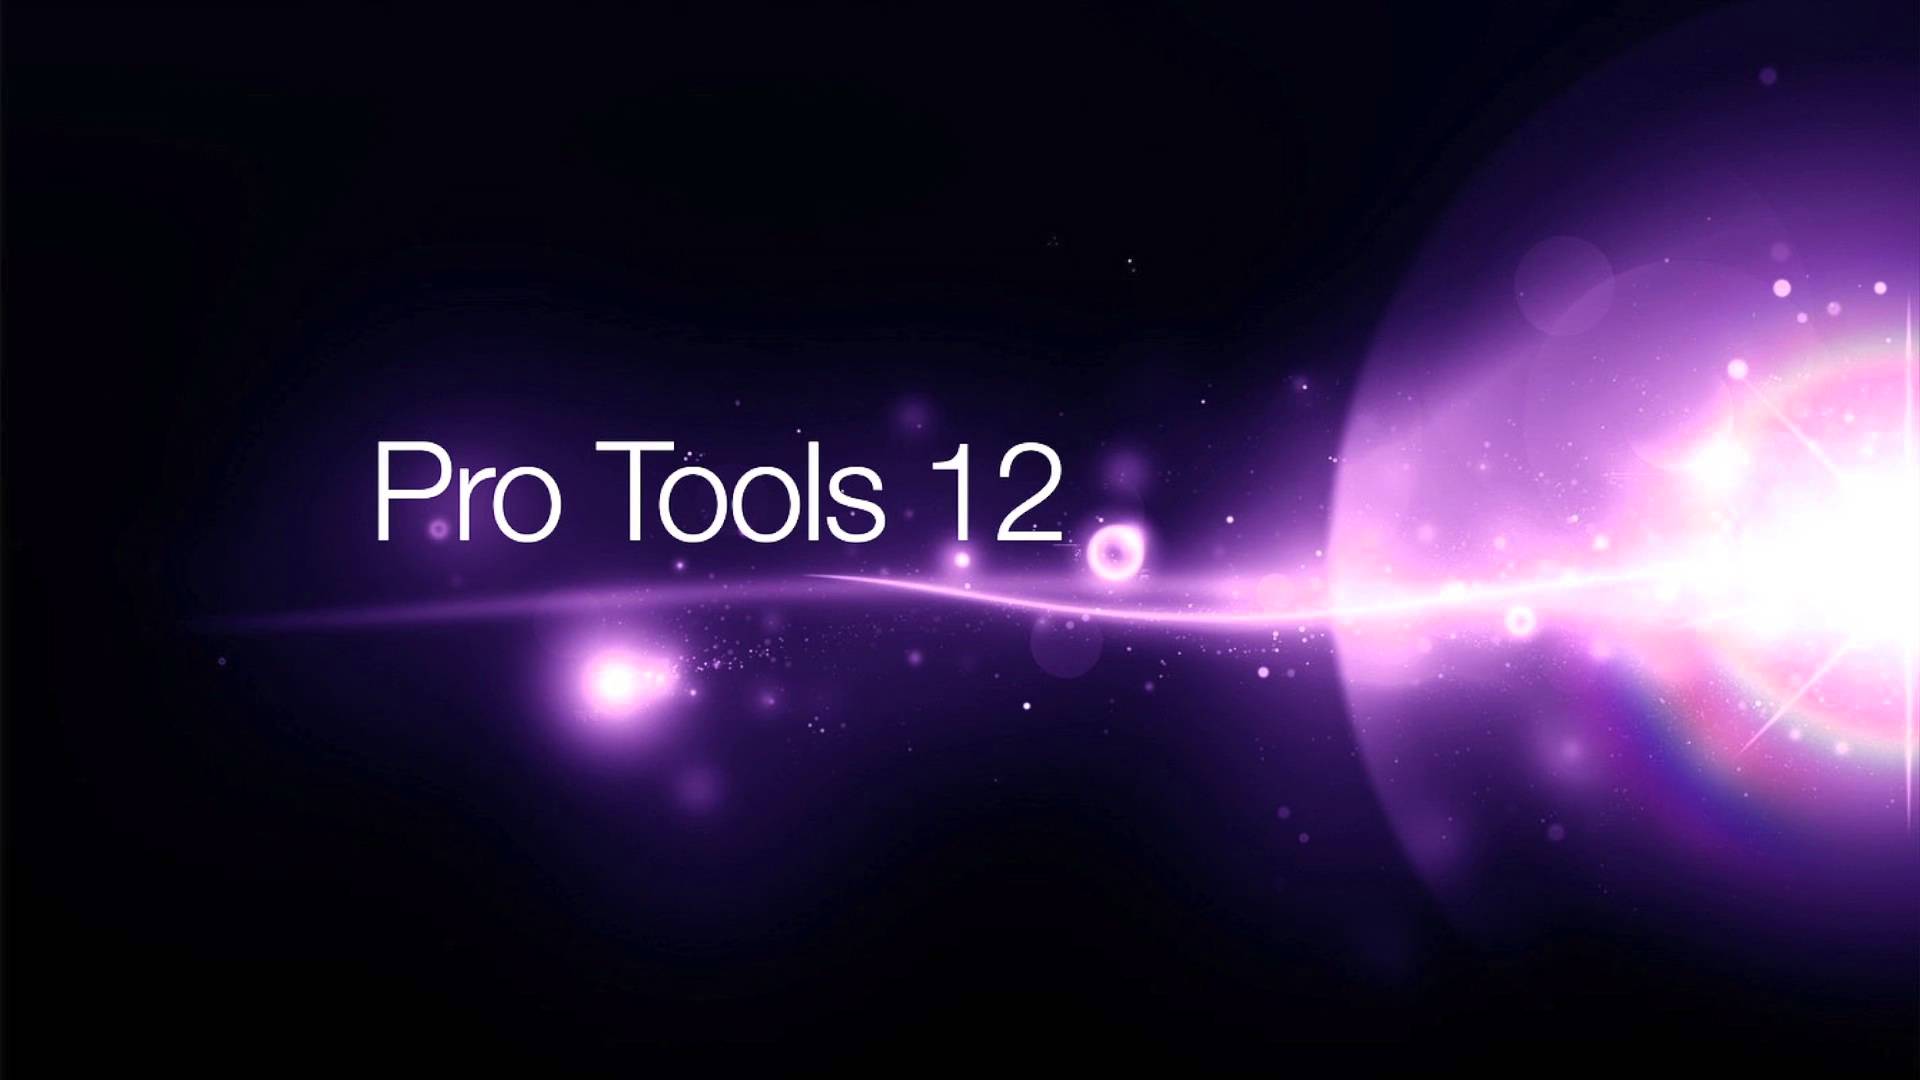 First Session With Pro Tools 12 By Bbsprodmusic - Pro Tools 12 , HD Wallpaper & Backgrounds